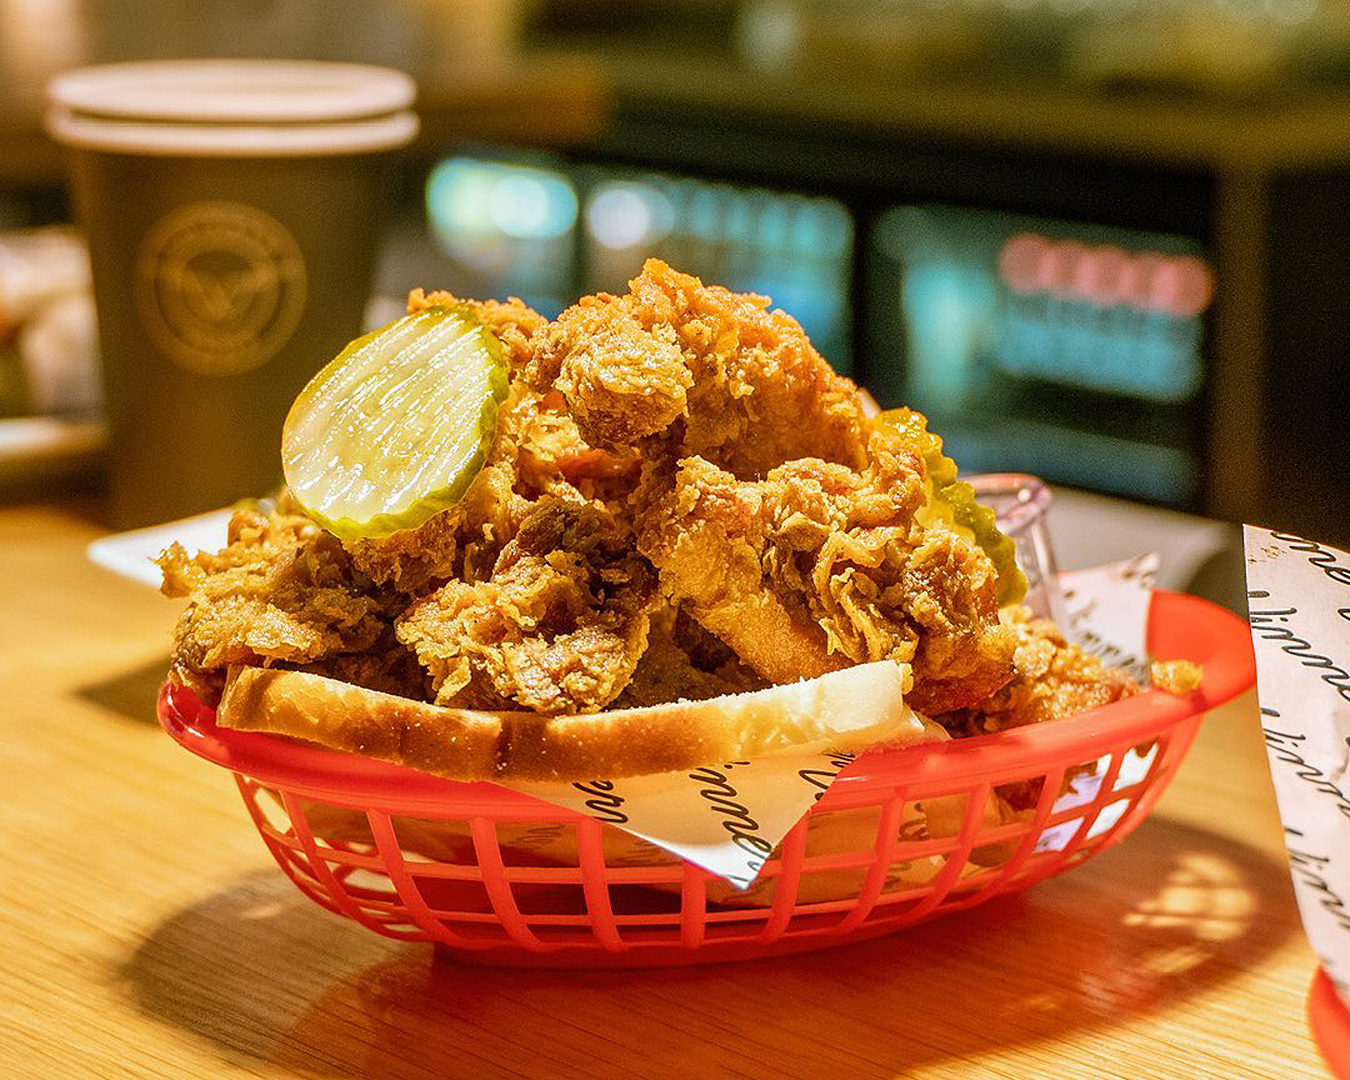 A fried chicken basket with pickles and bread from Winner Winner in Pukekohe.